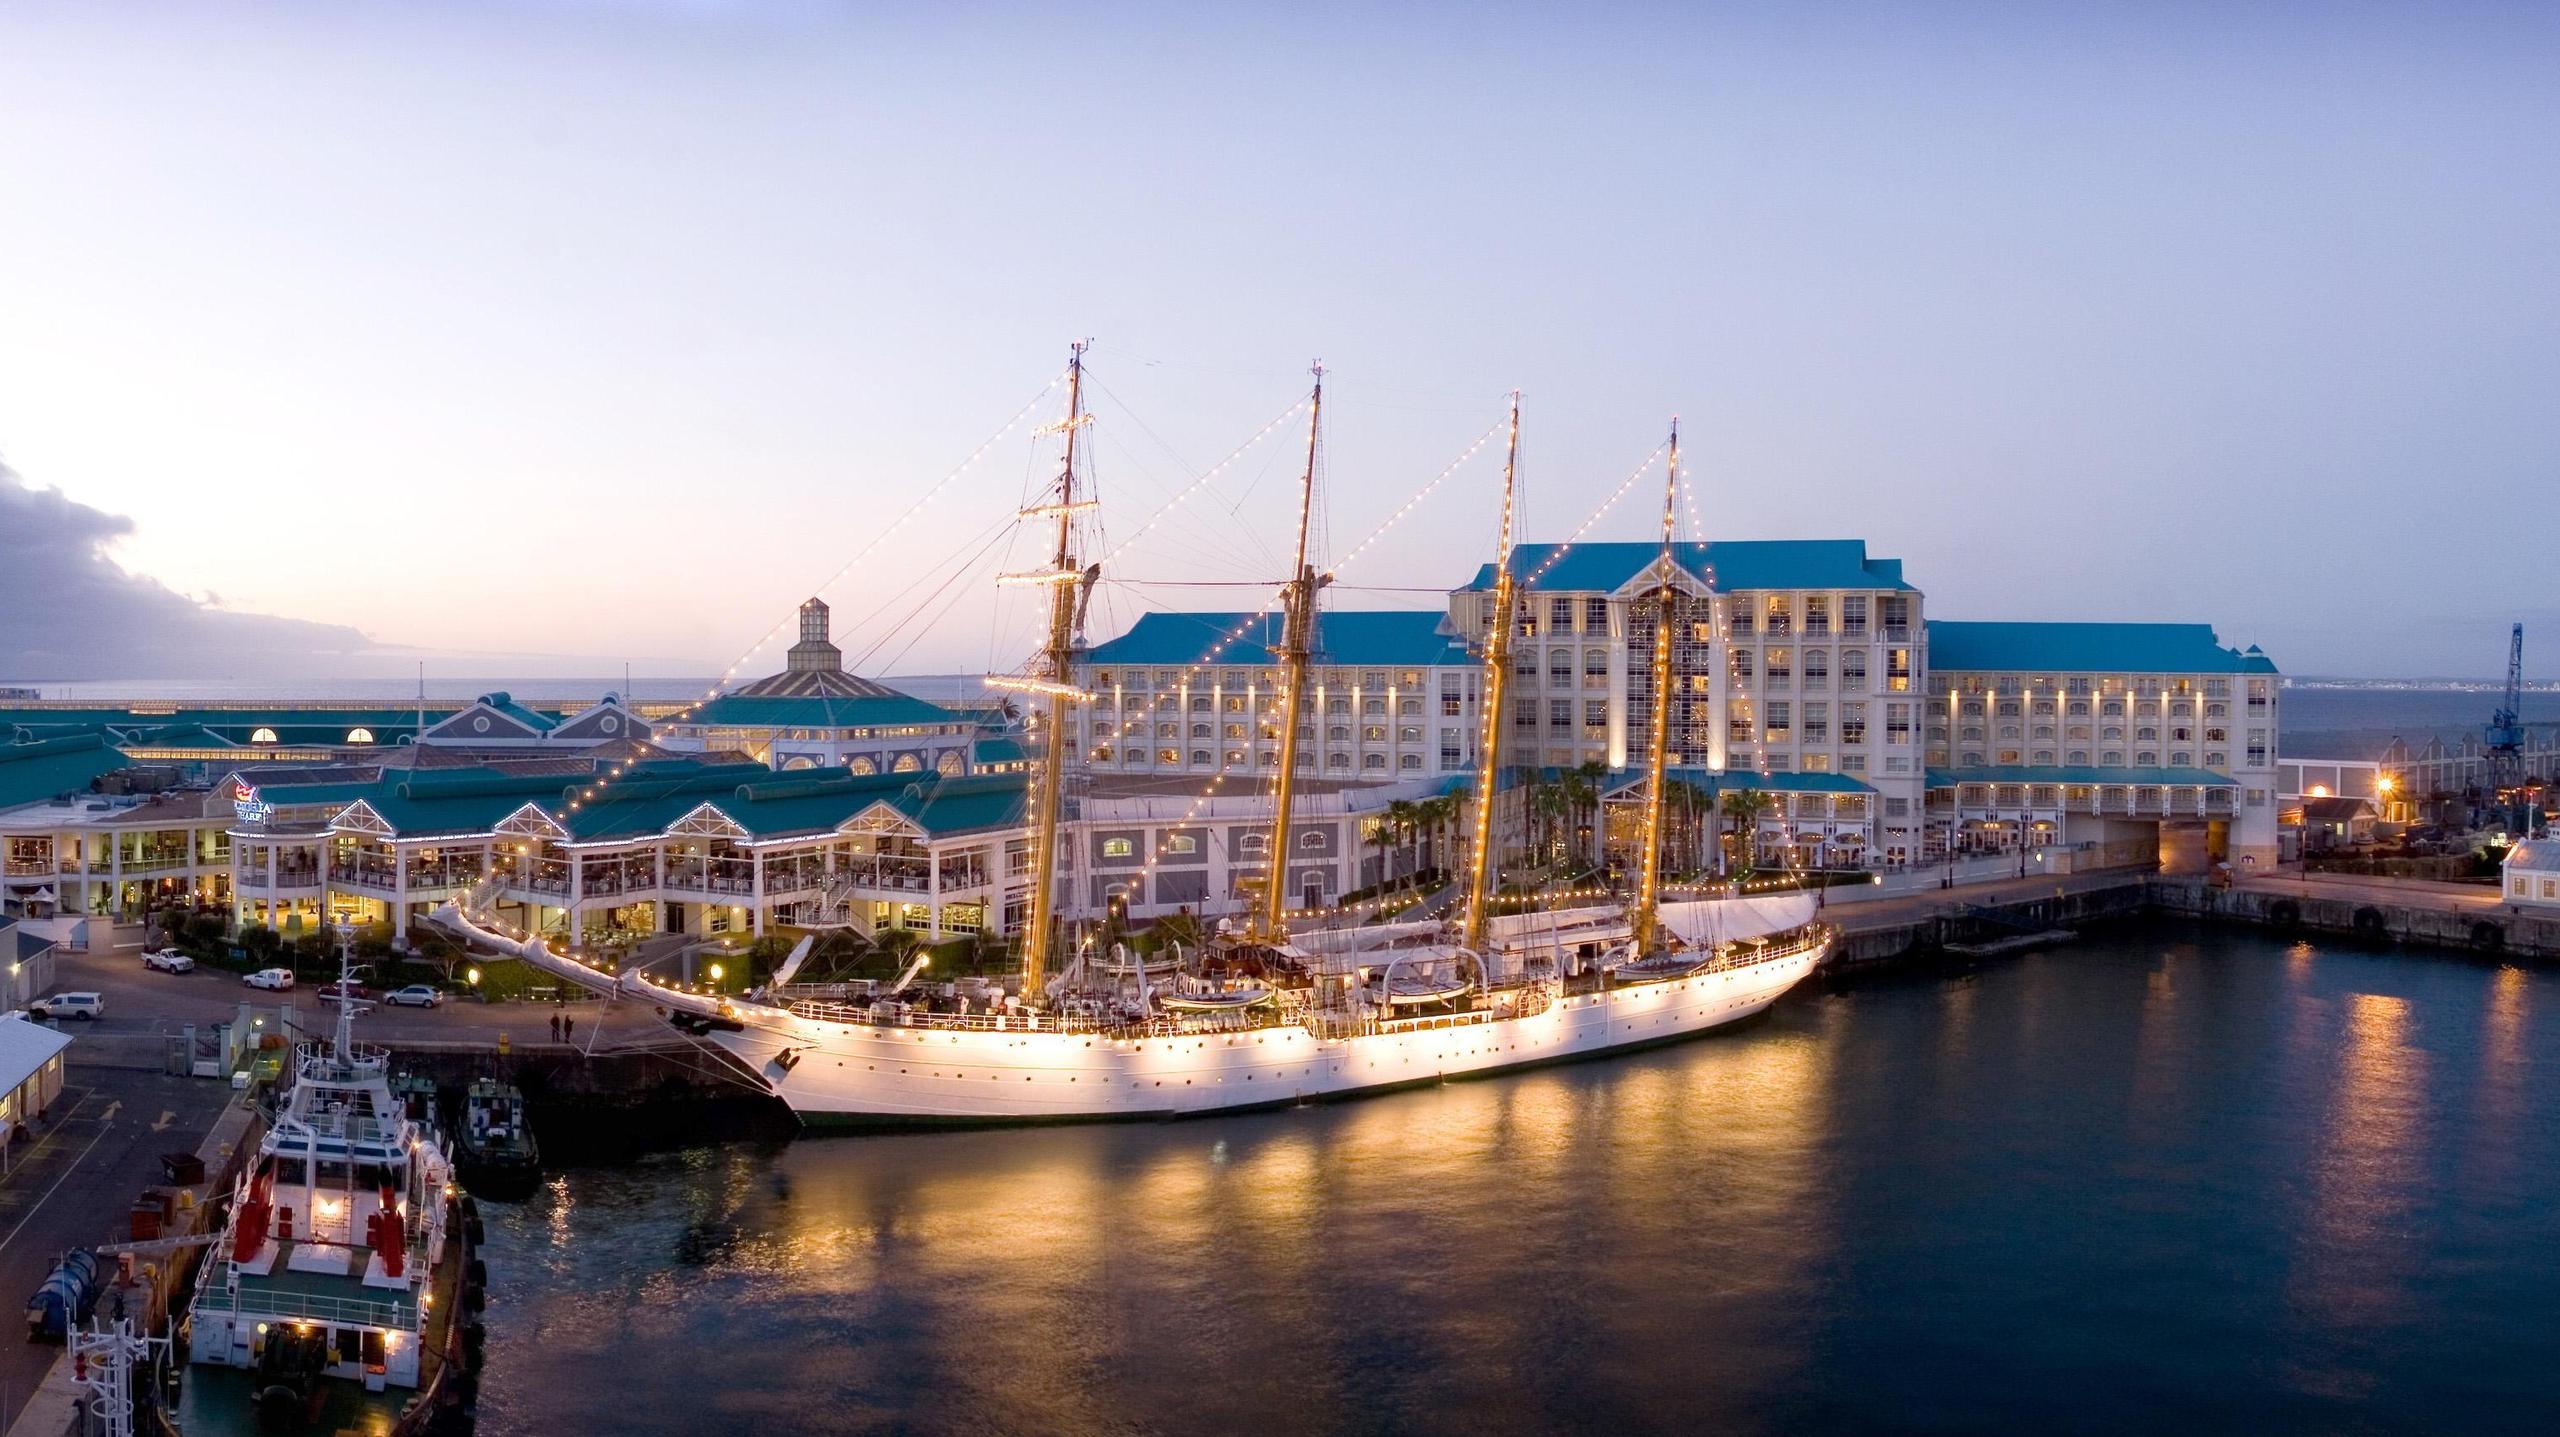 A classical sailing ship lit up by lights illuminating part of the V&A waterfront